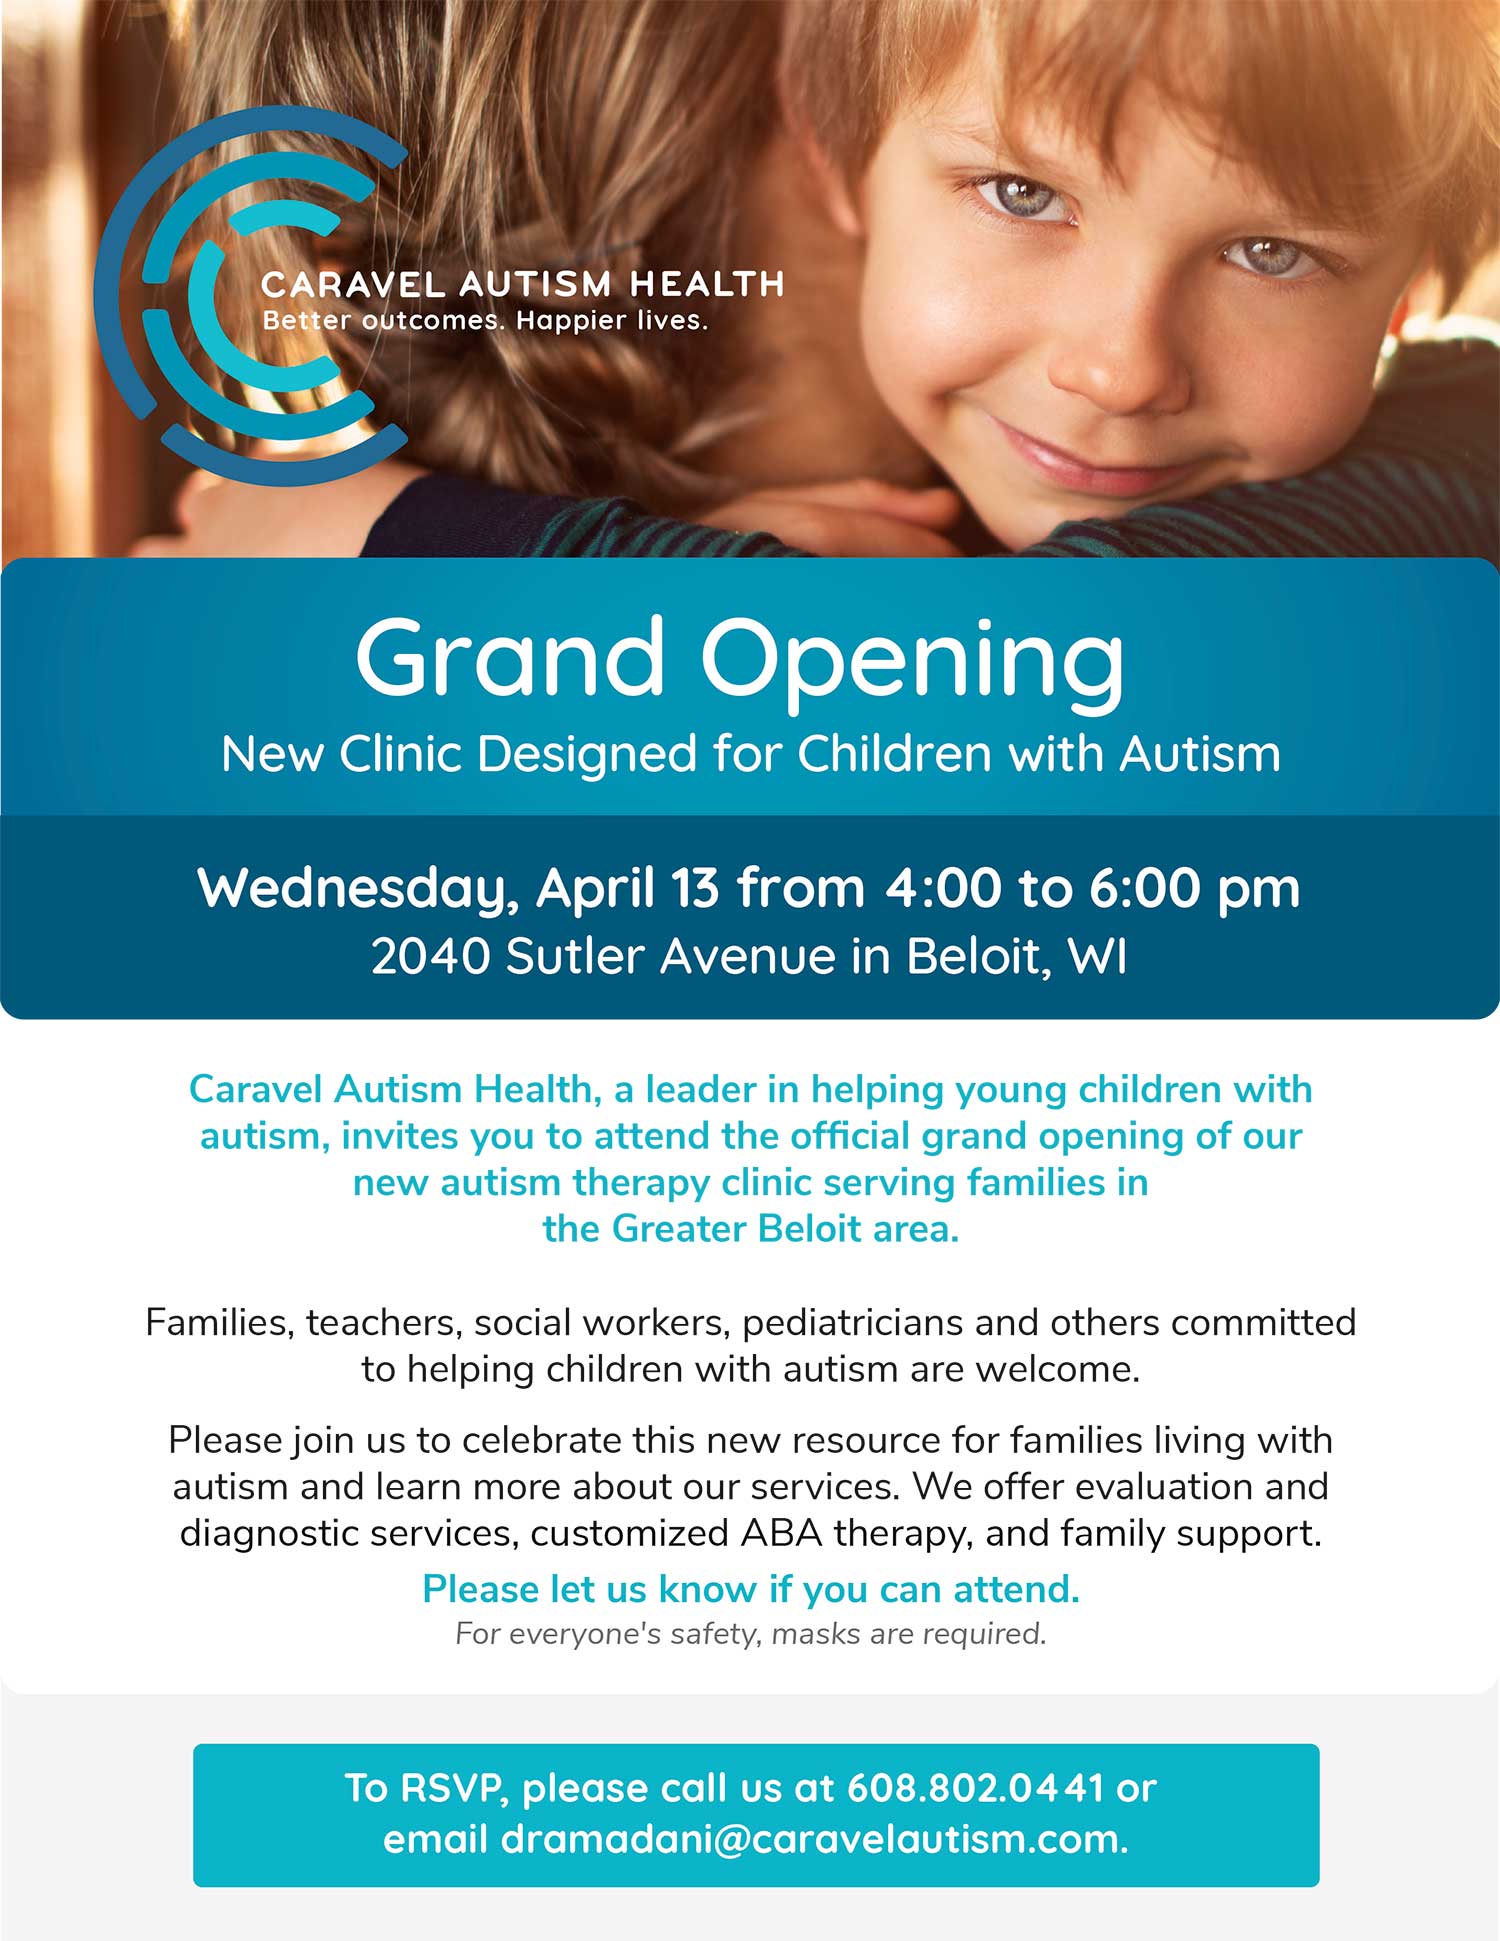 Caravel Autism Health Grand Opening